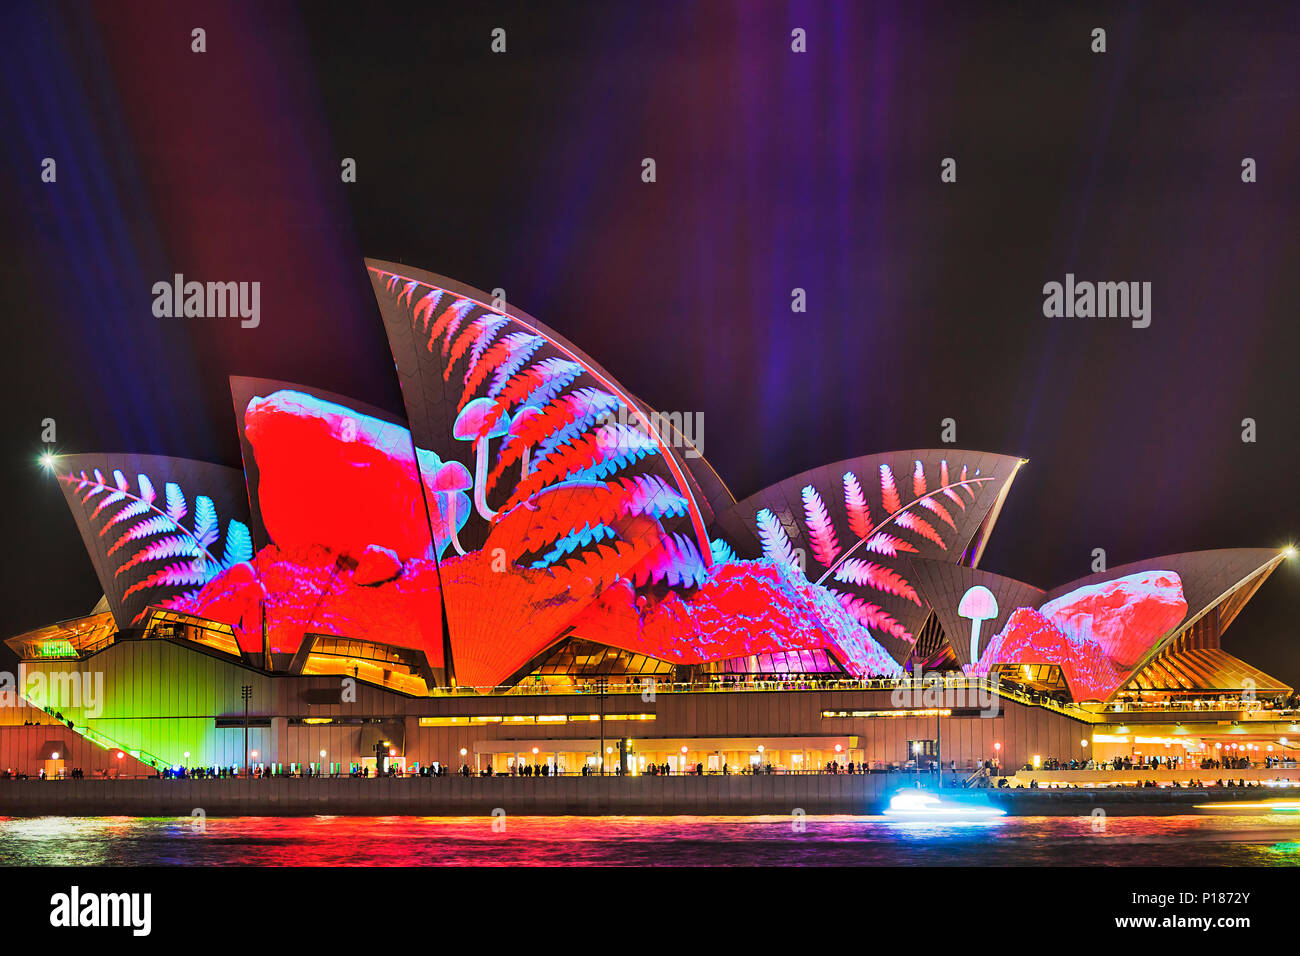 Sydney, Australia - 25 May, 2018: Sydney city landmark of Sydney Opera House at harbour waterfront during annual light show of music, light and ideas  Stock Photo